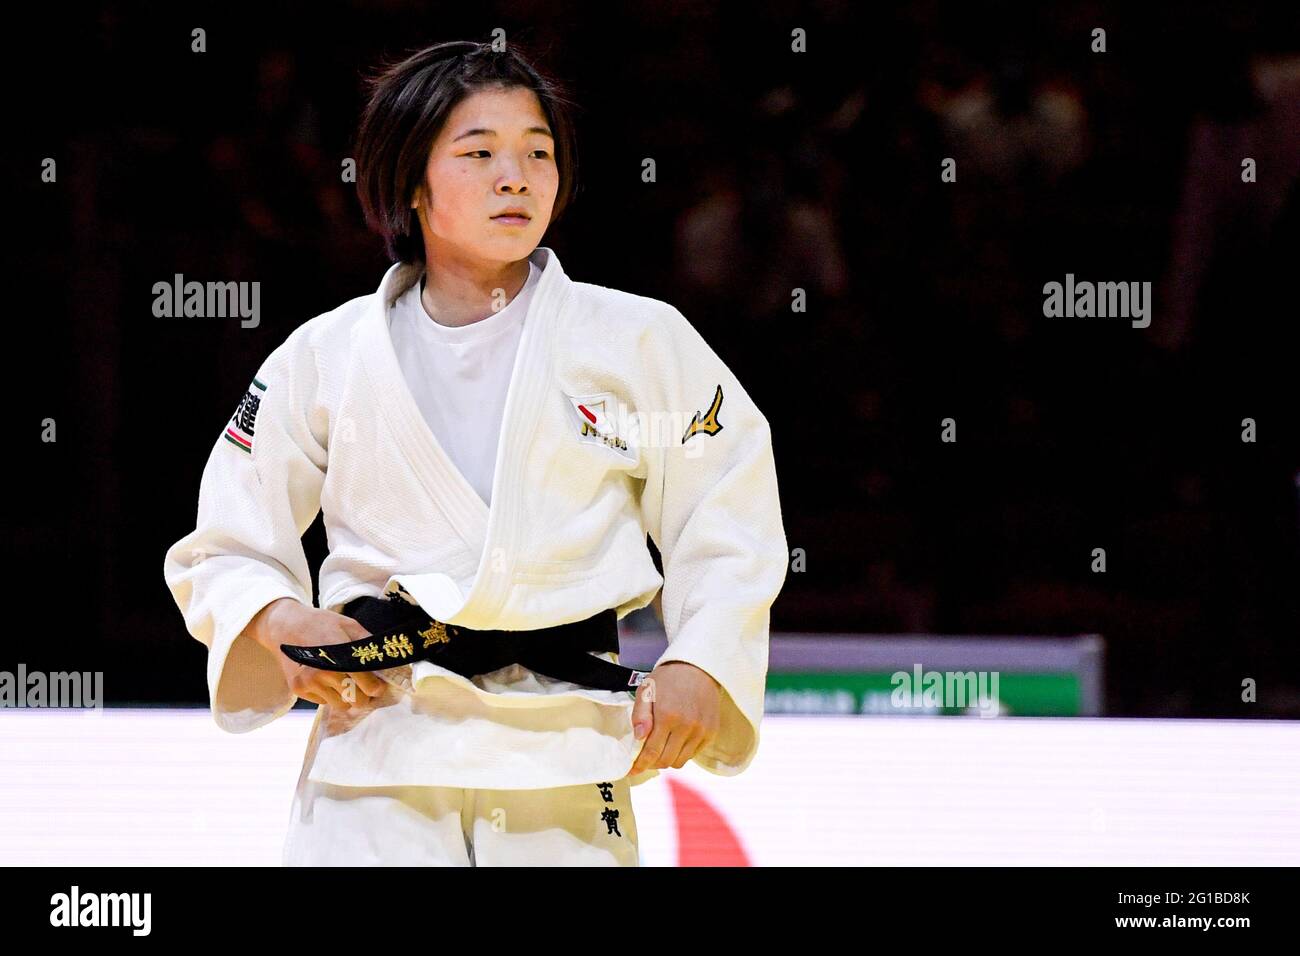 BUDAPEST, HUNGARY - JUNE 6: Wakana Koga of Japan during the World Judo Championships Hungary 2021 at Papp Laszlo Budapest Sports Arena on June 6, 2021 in Budapest, Hungary (Photo by Yannick Verhoeven/Orange Pictures) Stock Photo